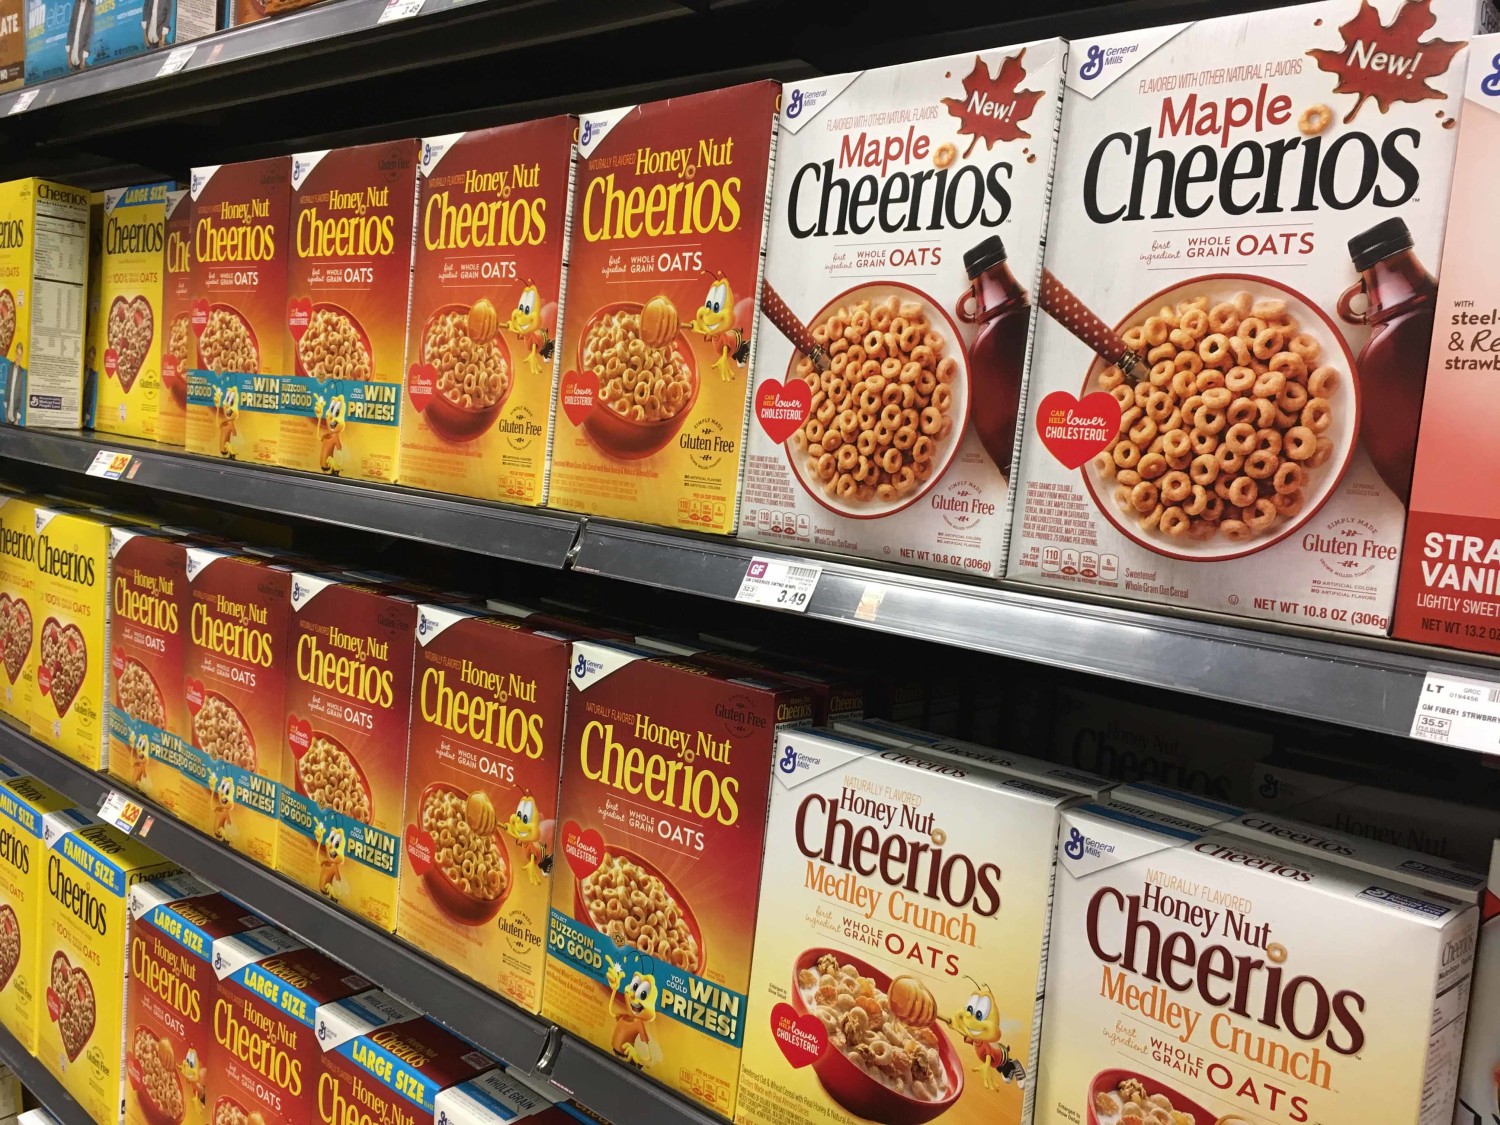 Cheerios Discontinues Maple Flavor, and Fans Are Not Cheering